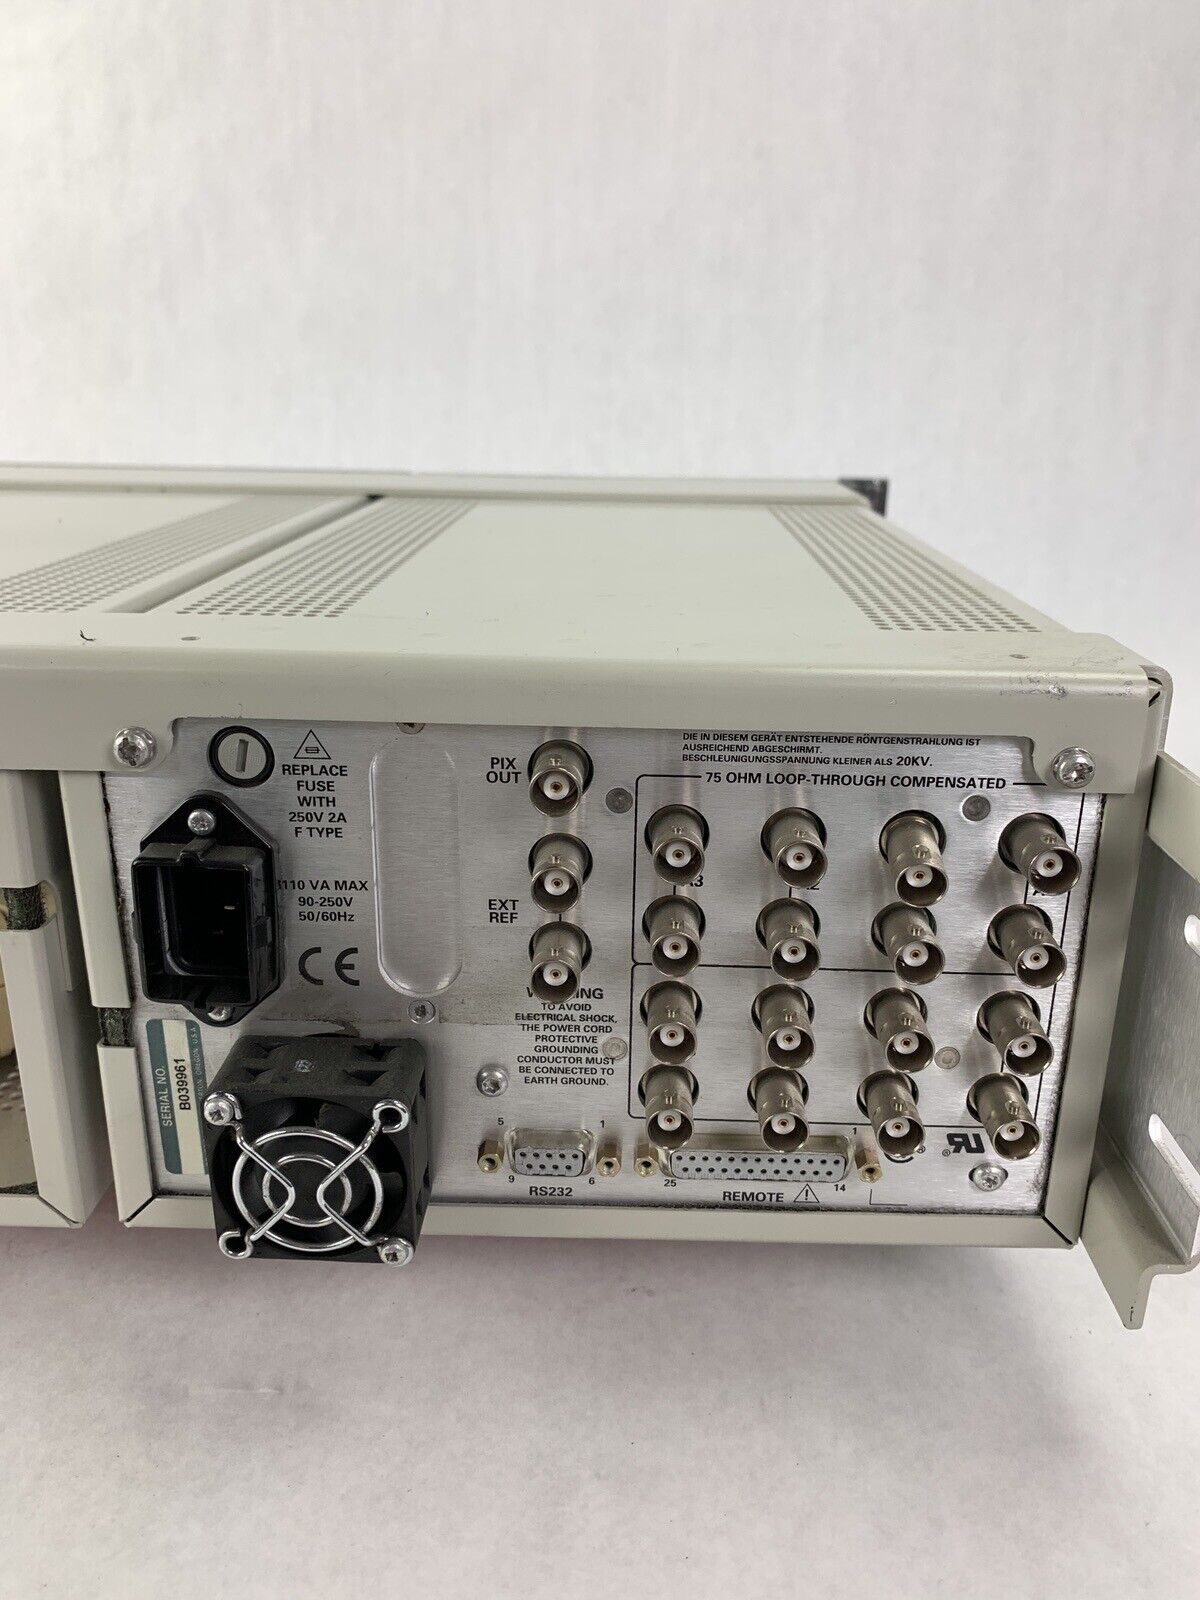 Tektronix 1750A Waveform Vector Monitor Power Tested for Parts and Repair